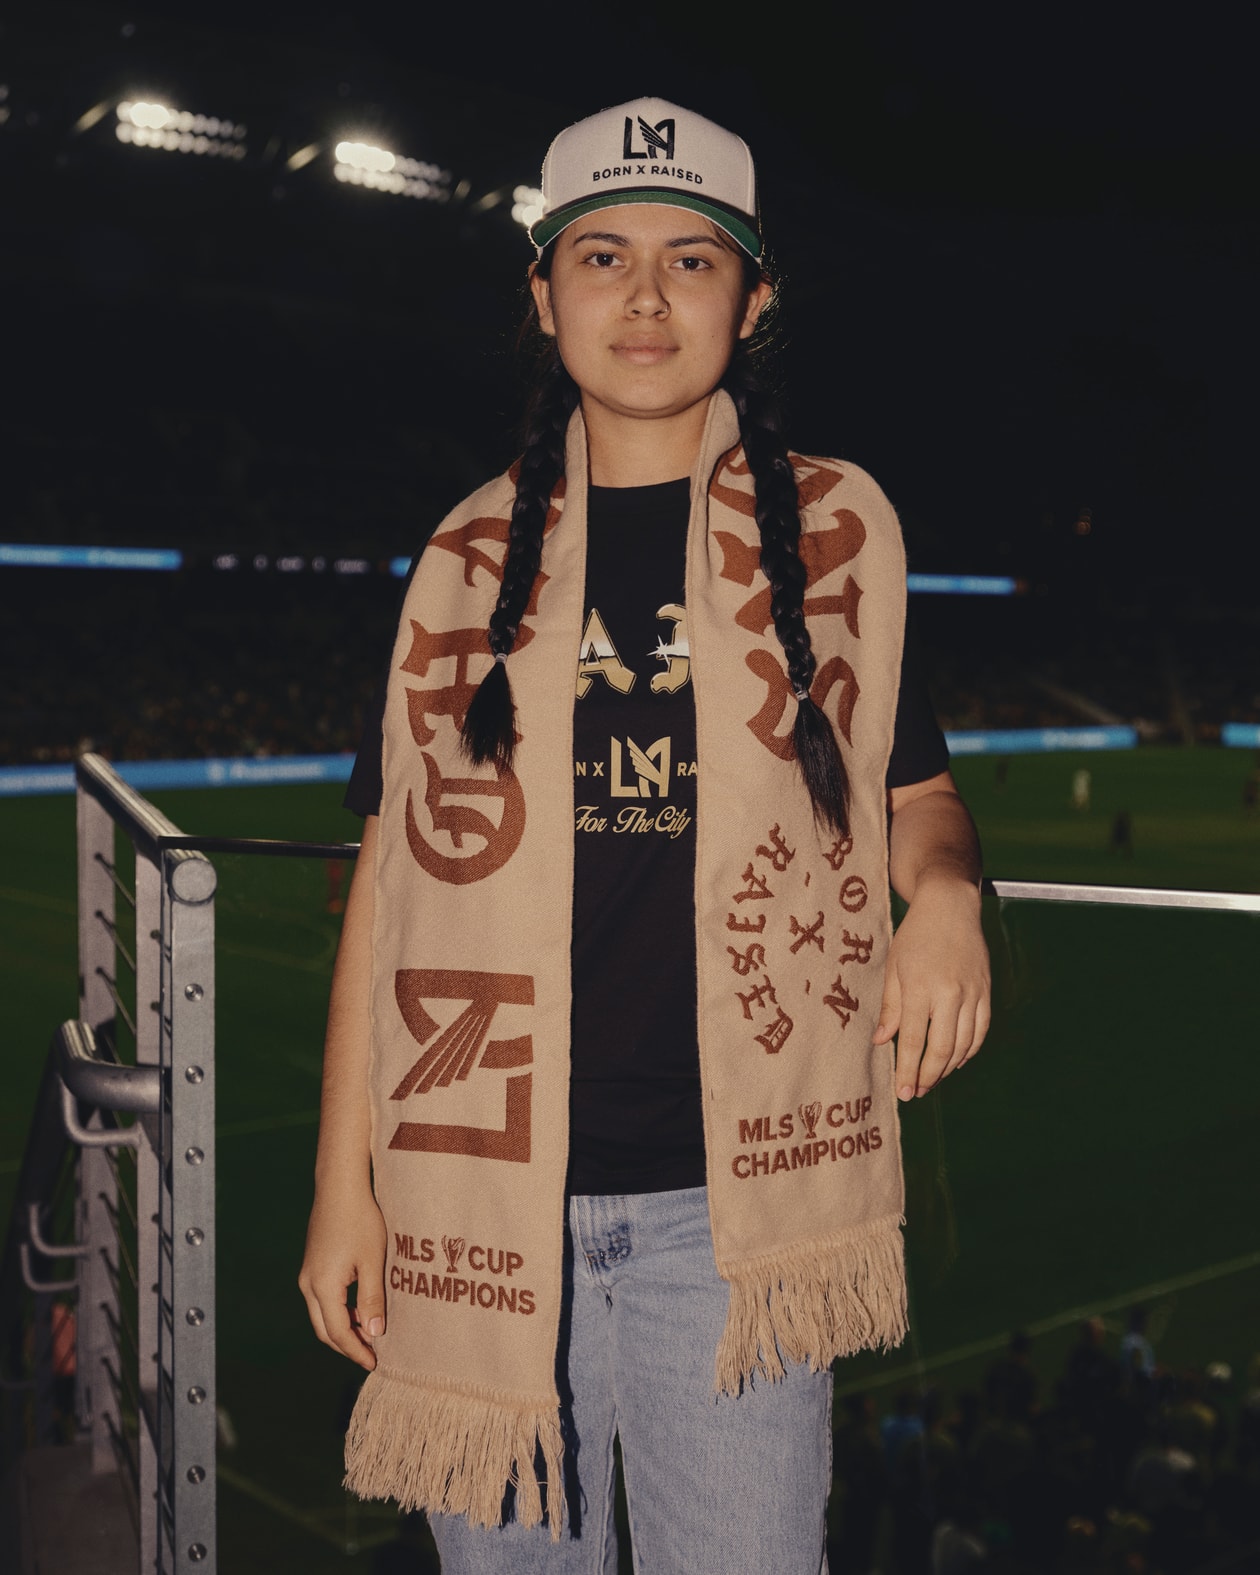 Born X Raised Releases Third Collection with LAFC